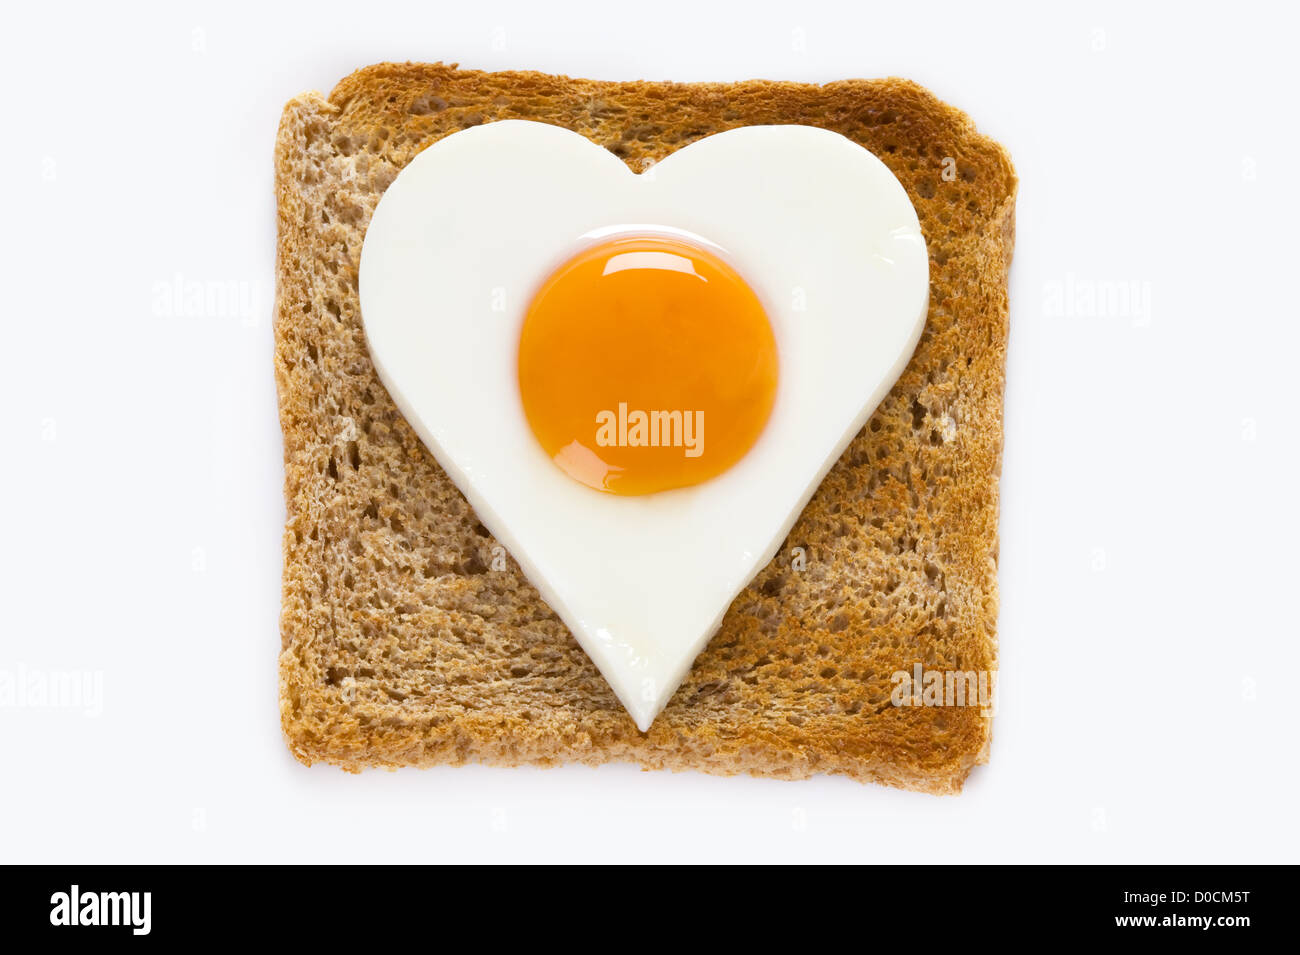 heart shaped cooked egg 'sunny side up' on a slice of square shape toast Stock Photo